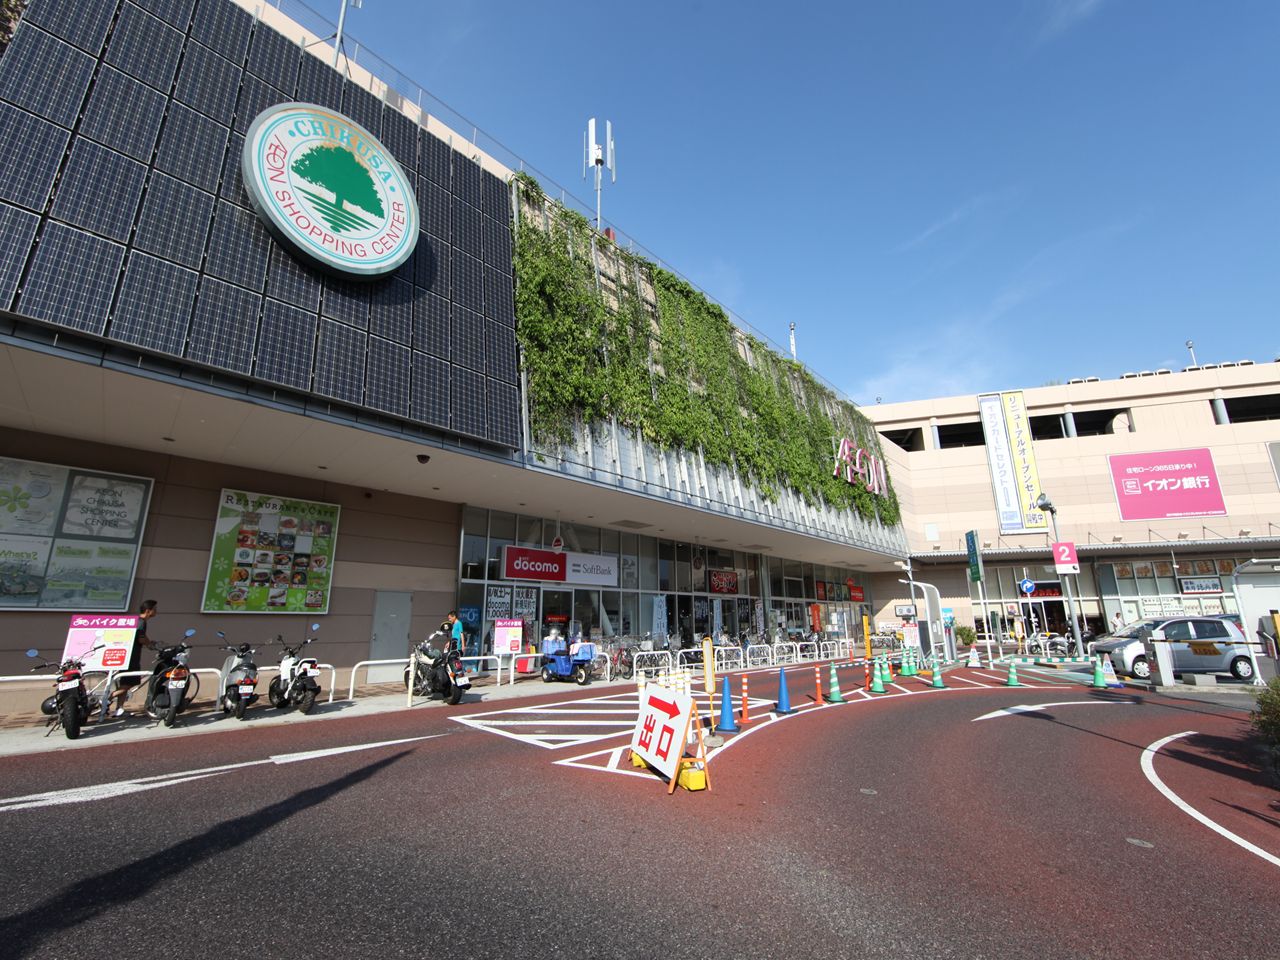 Shopping centre. Chigusa (with sales Super 24 hours) ion shopping center 640m until the (shopping center)